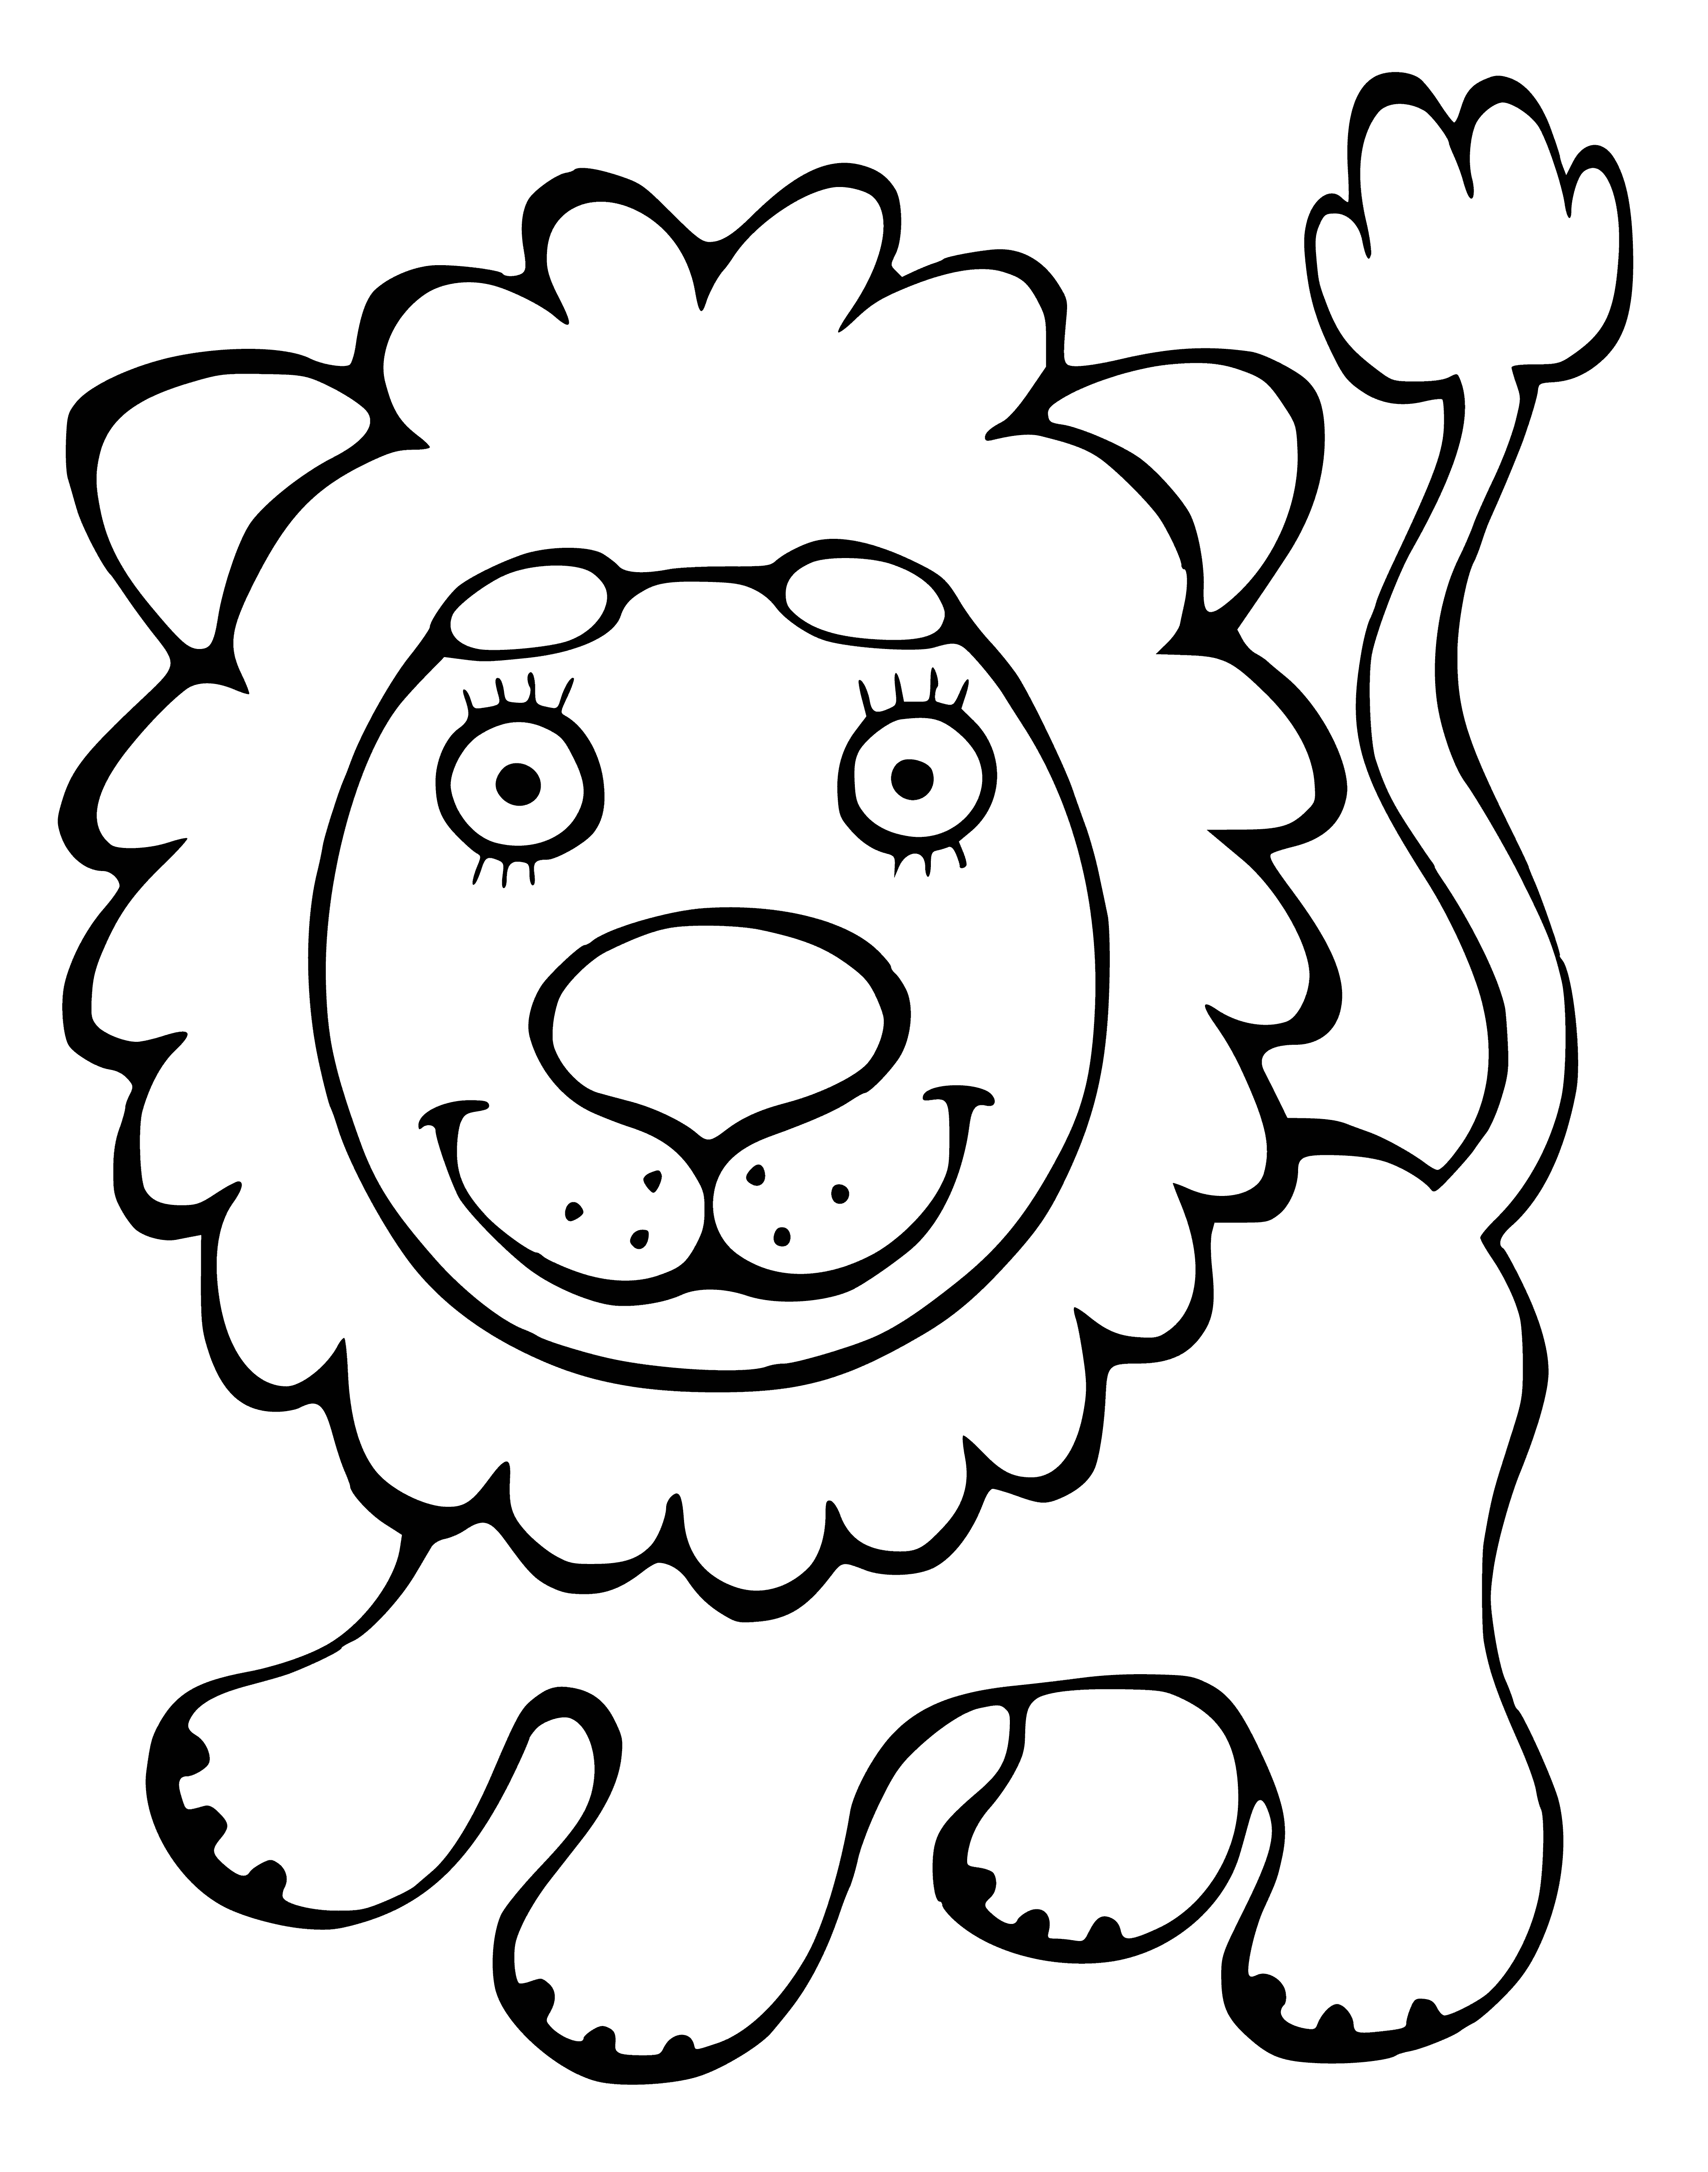 coloring page: A lion lies in the grass, looking to the side with its mane blowing in the wind. #coloringpage